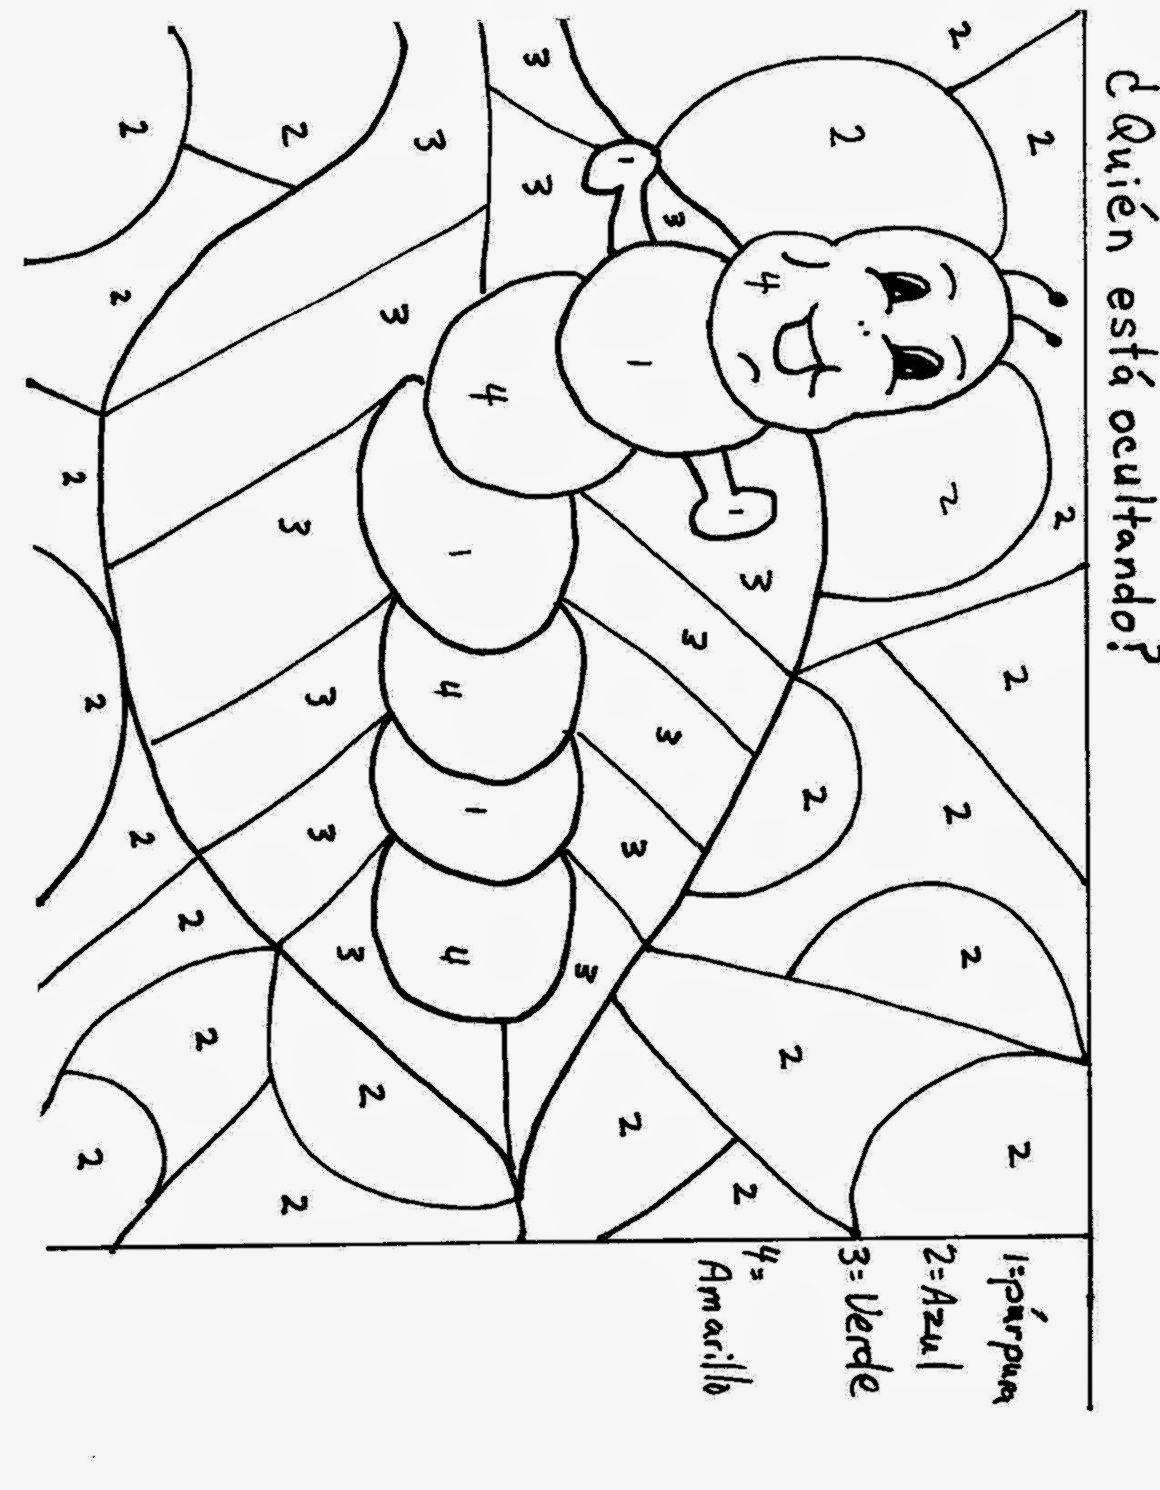 Free Pictures for: Spanish coloring pages 